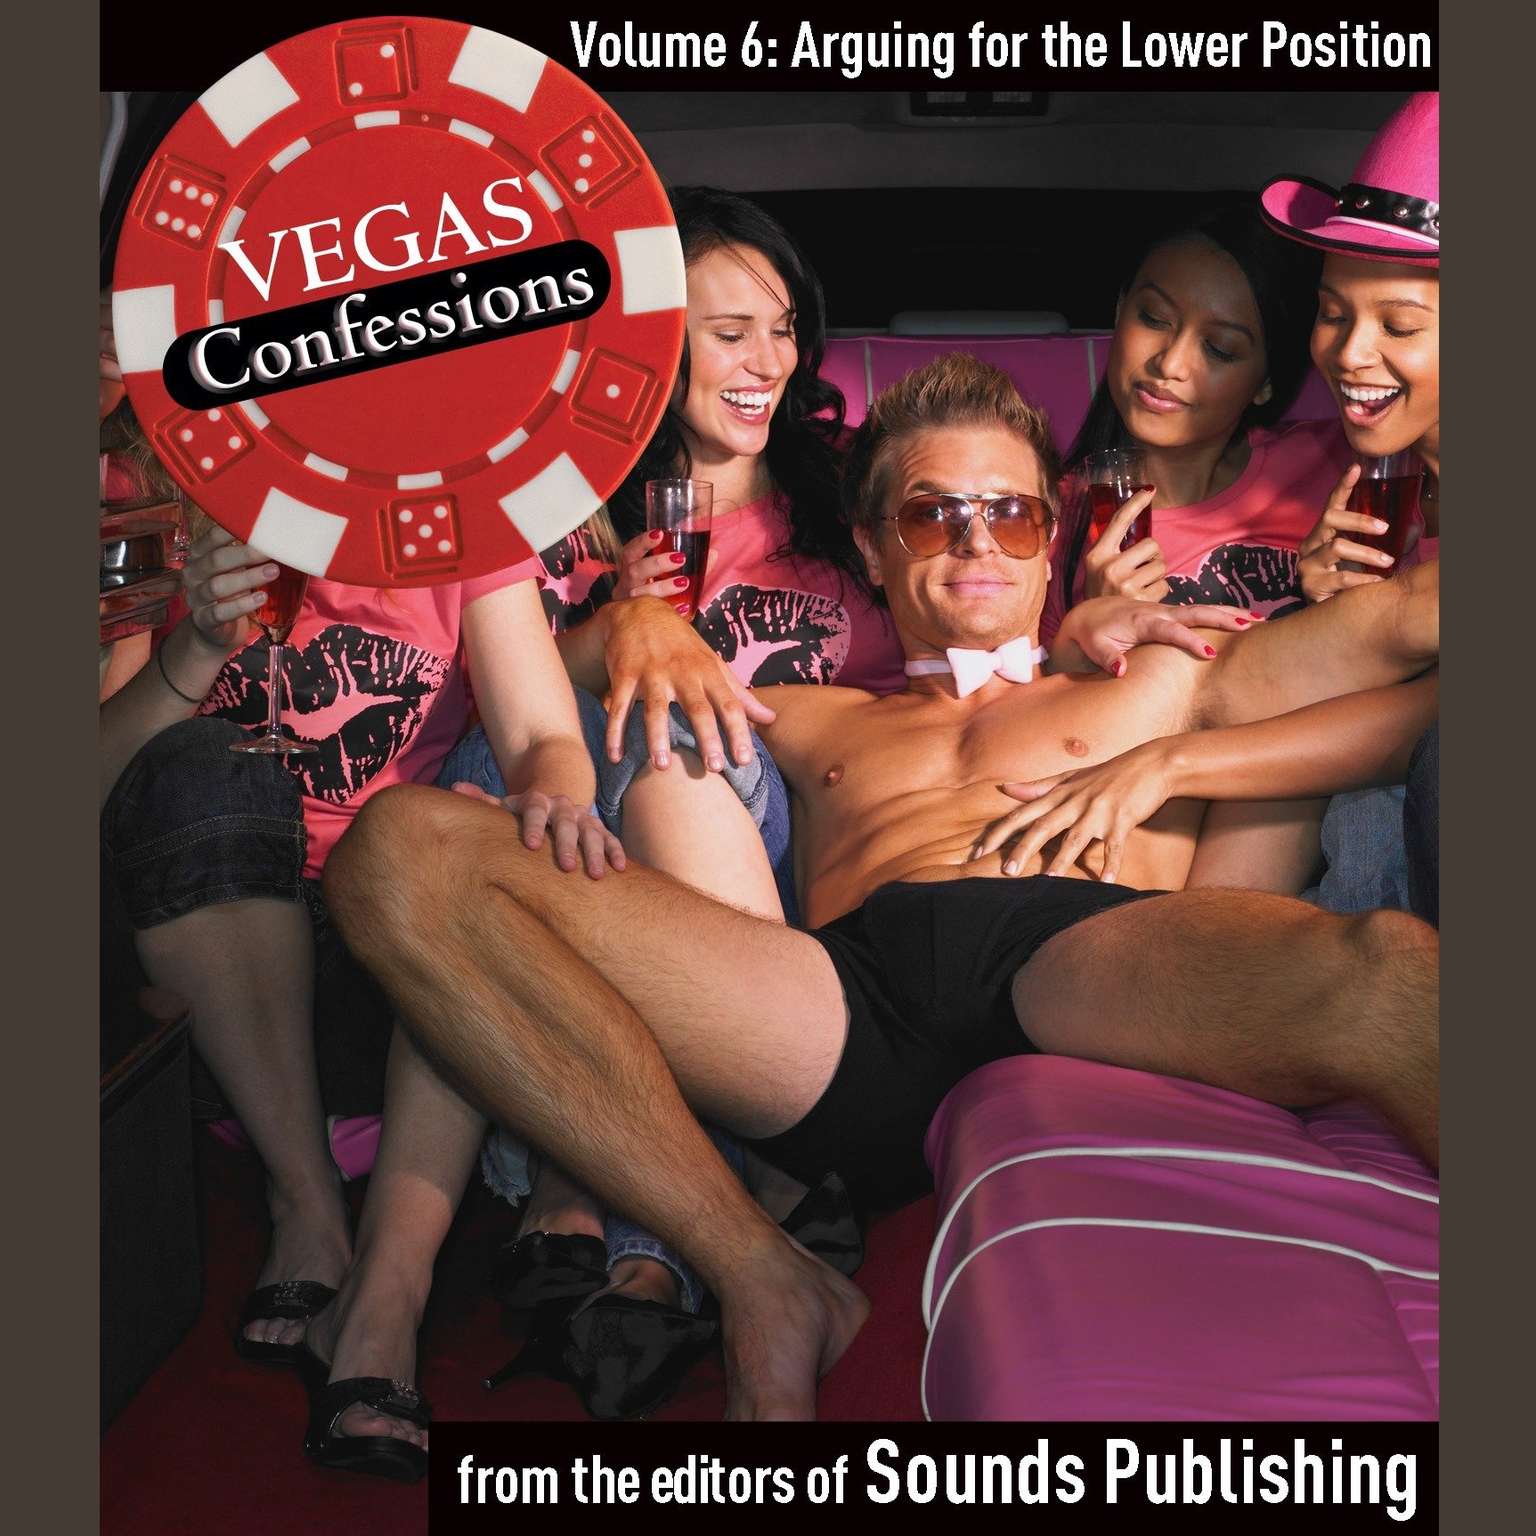 Vegas Confessions 6: Arguing for the Lower Position Audiobook, by The Editors of Sounds Publishing